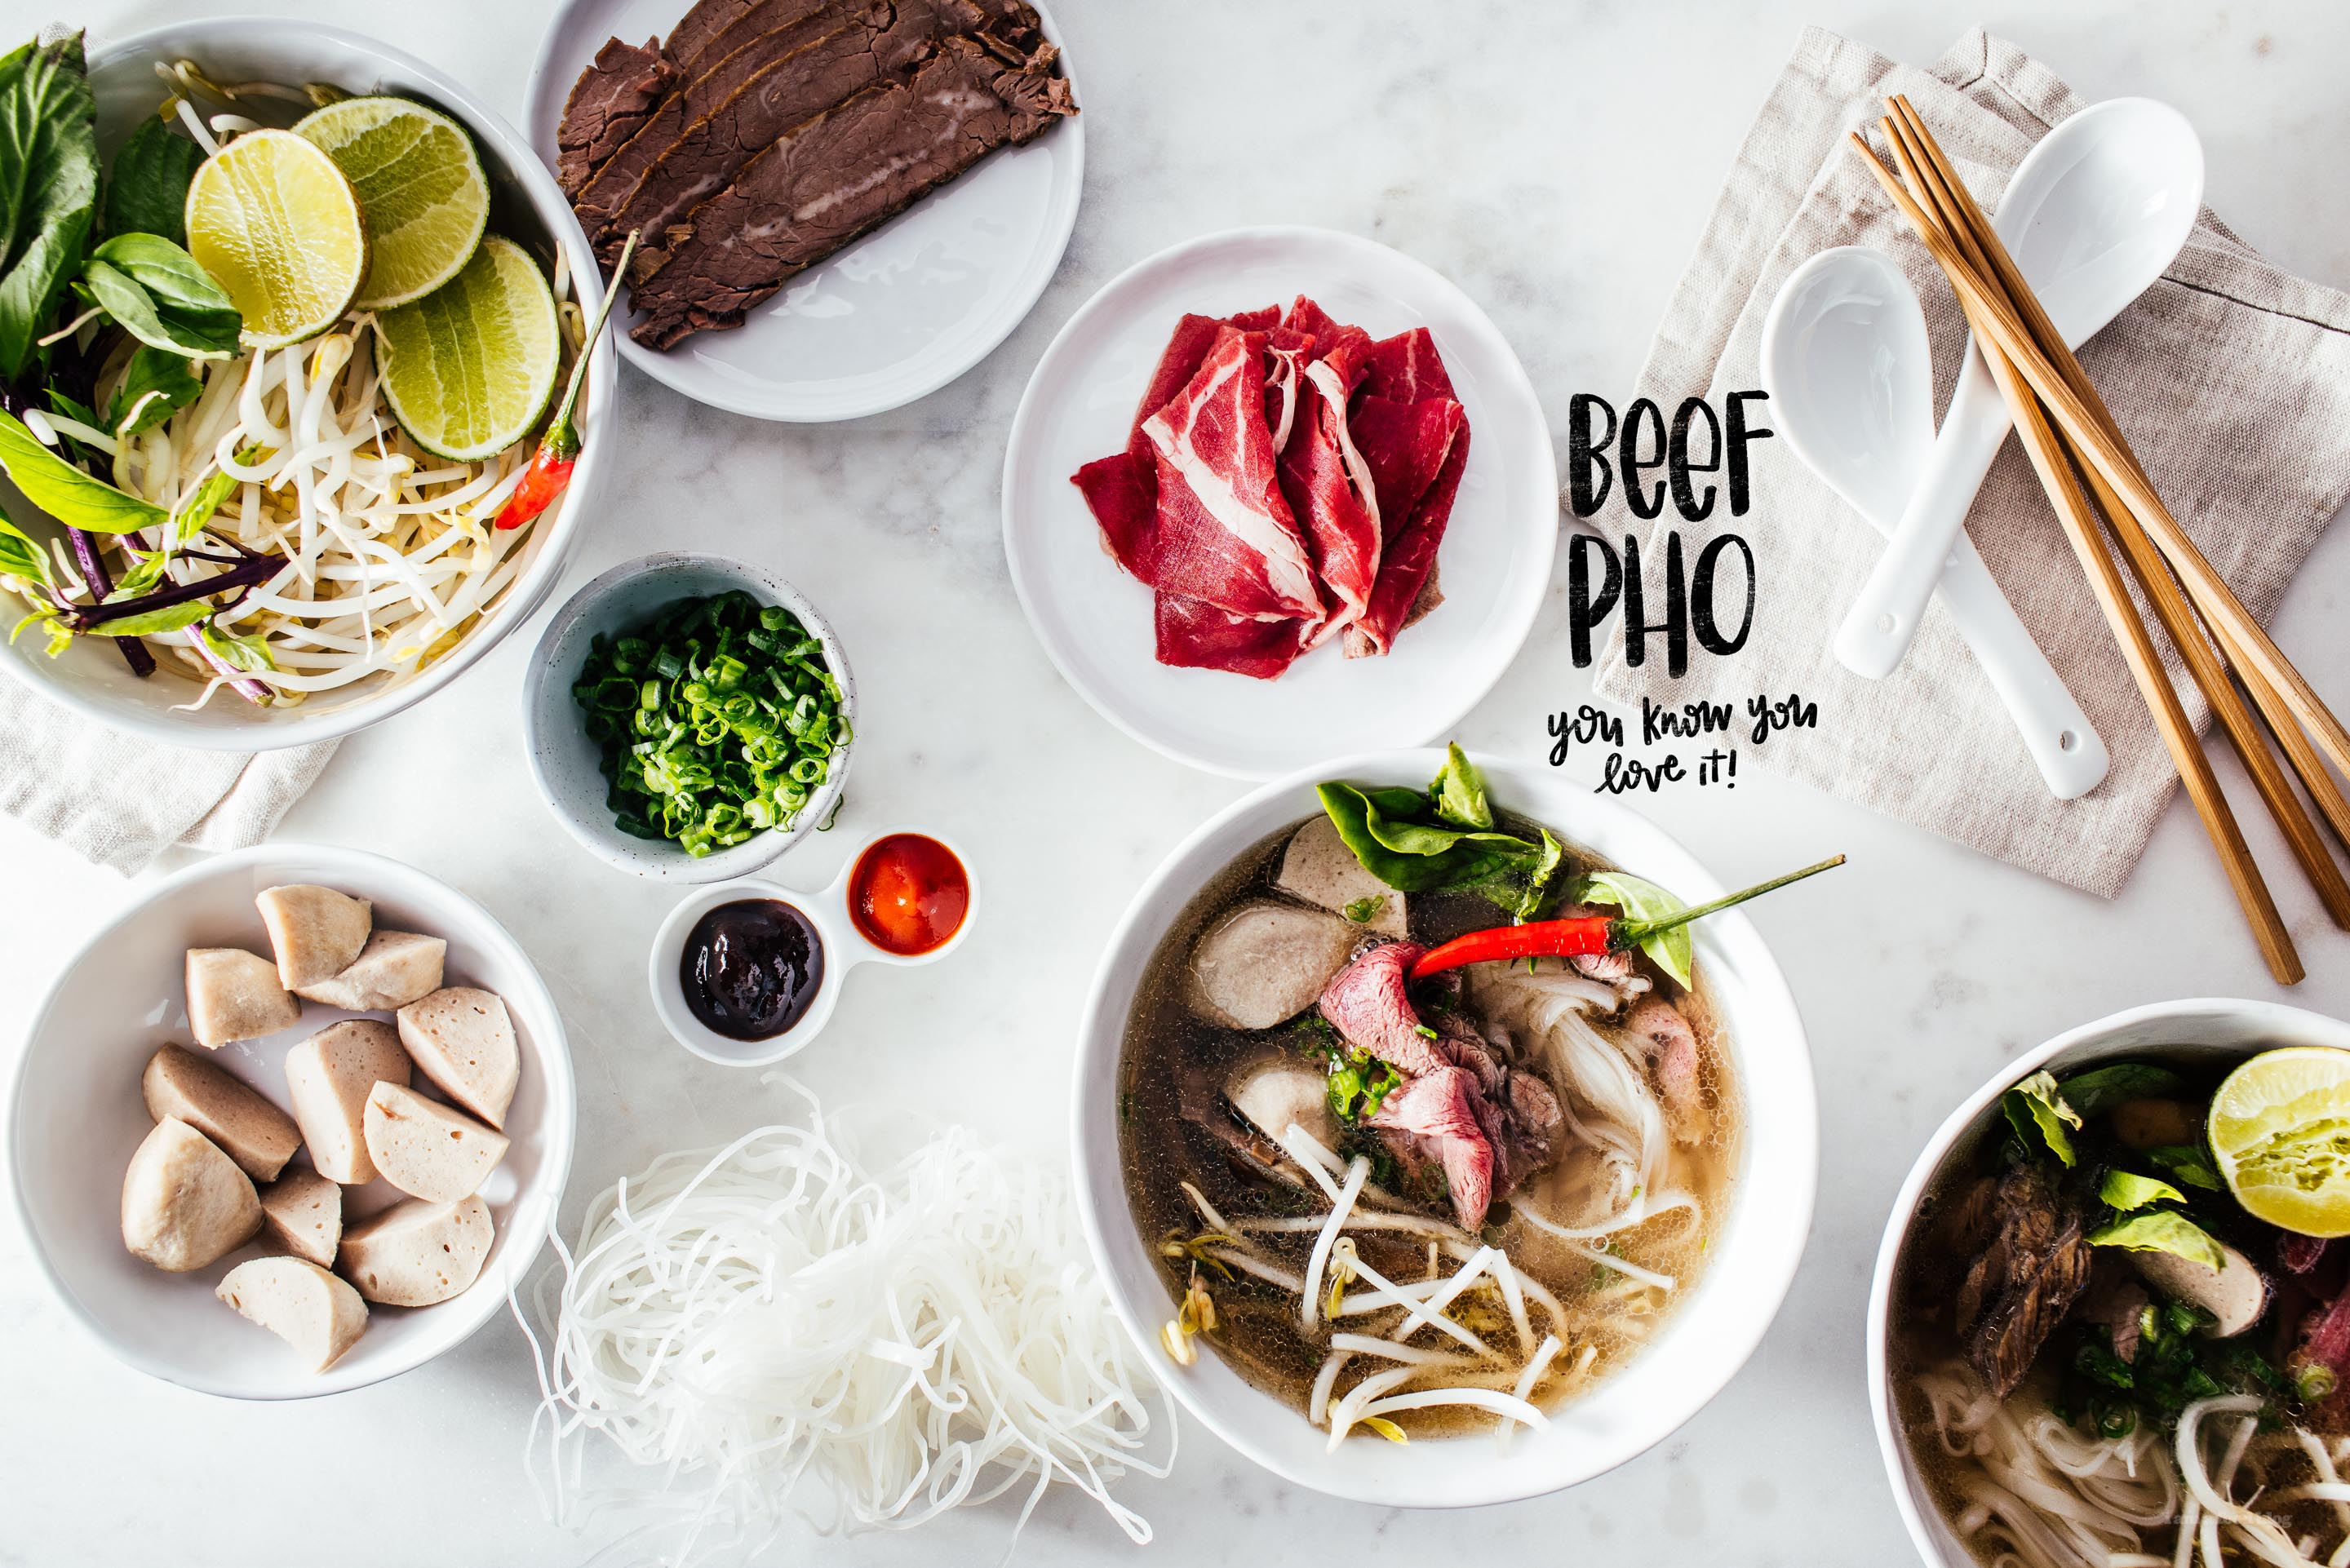 How to Make Basic, Great Pho